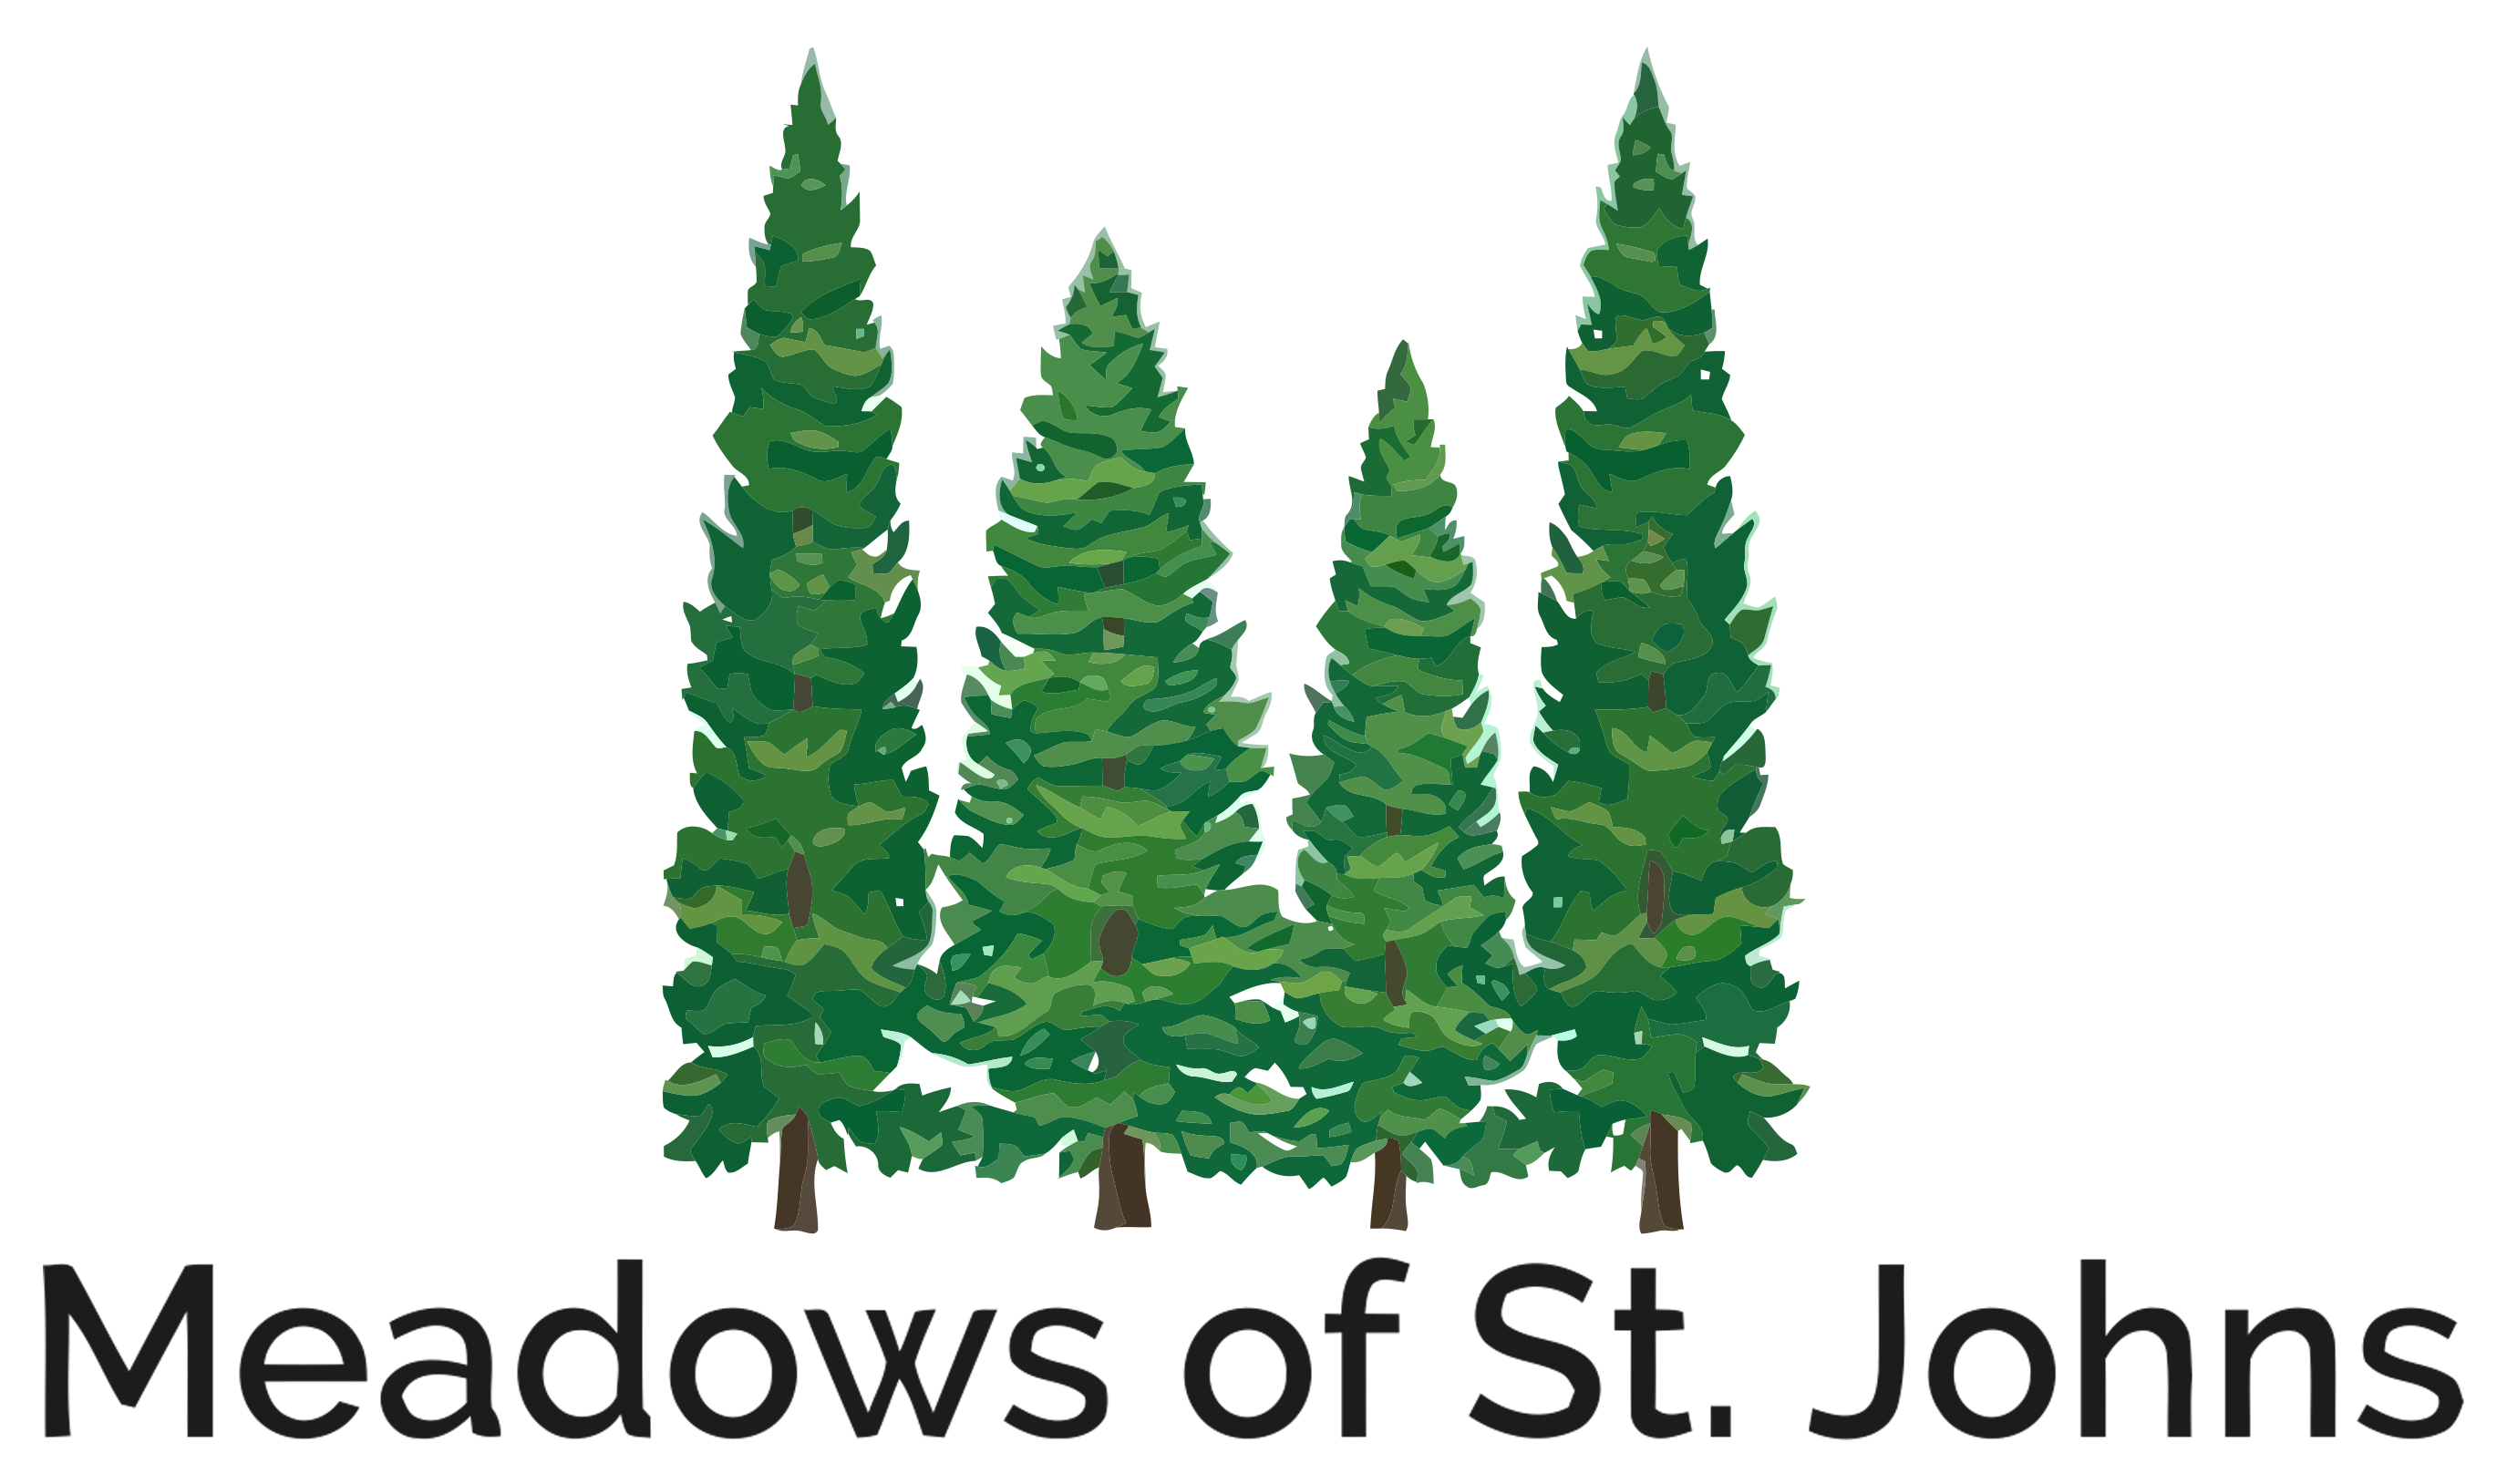 The Meadows of St. Johns MHC